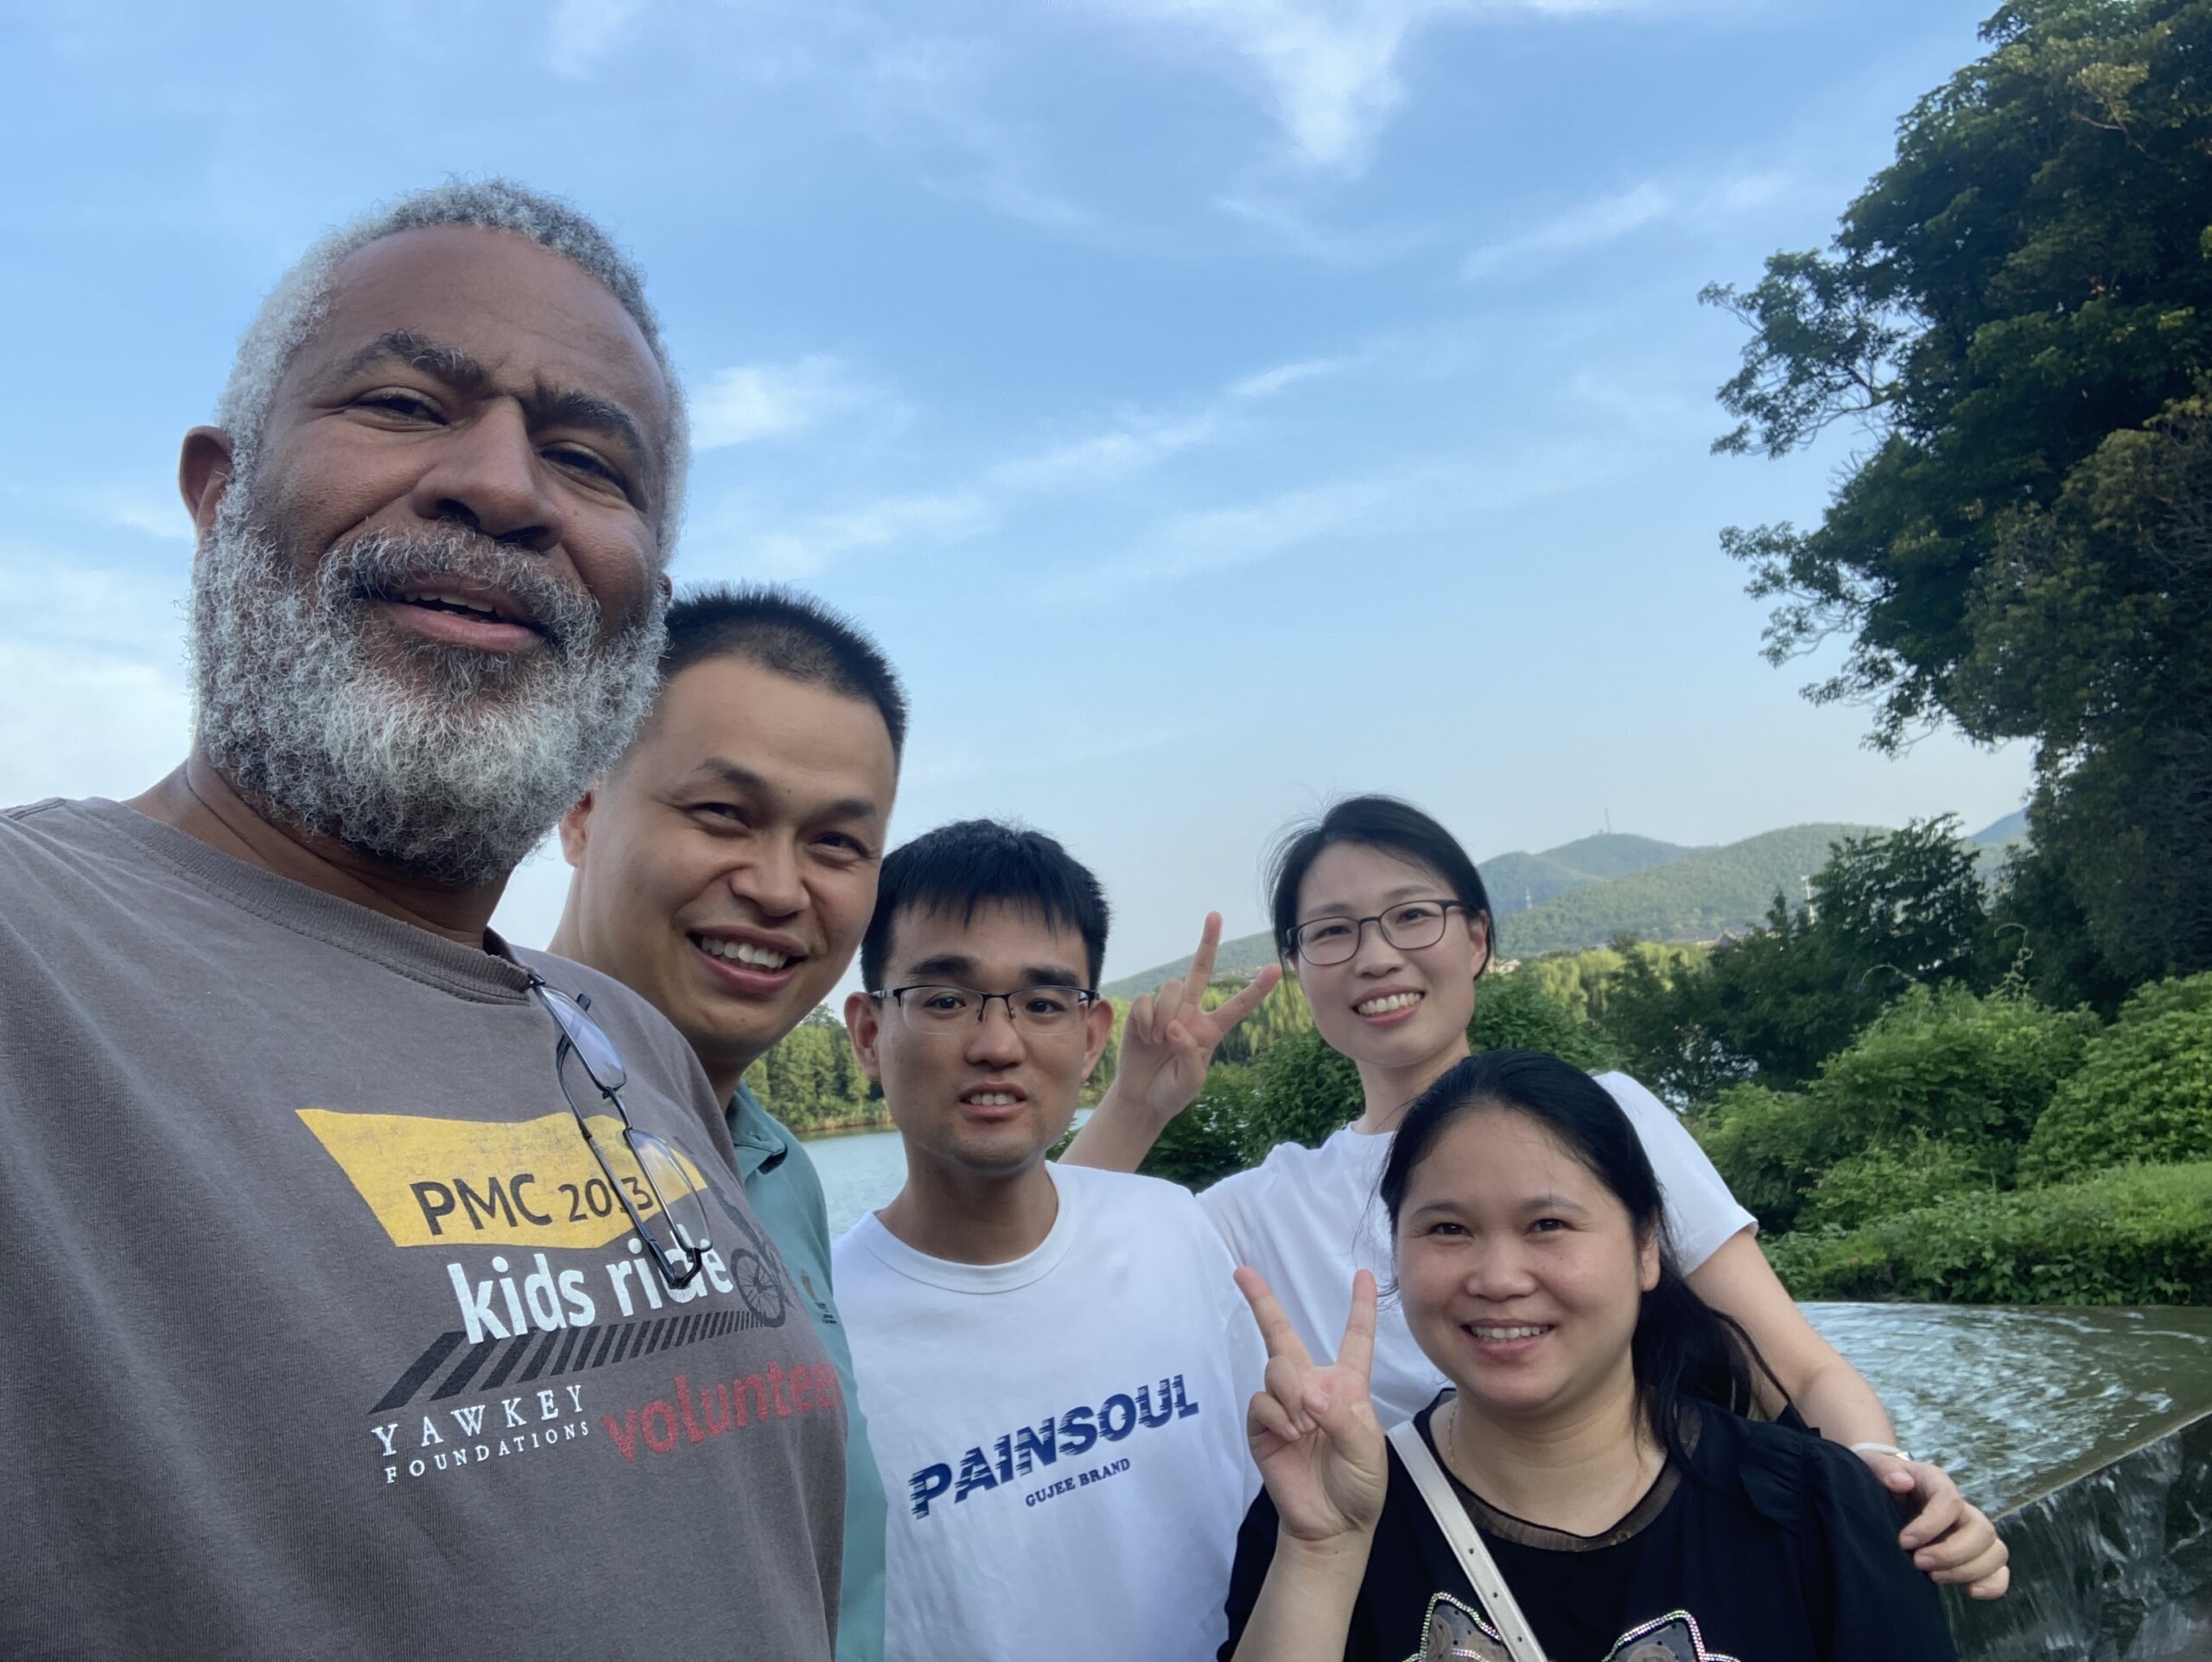 Scott relaxing with students and assistant professors of Jiangsu Normal University, Xuzhou.